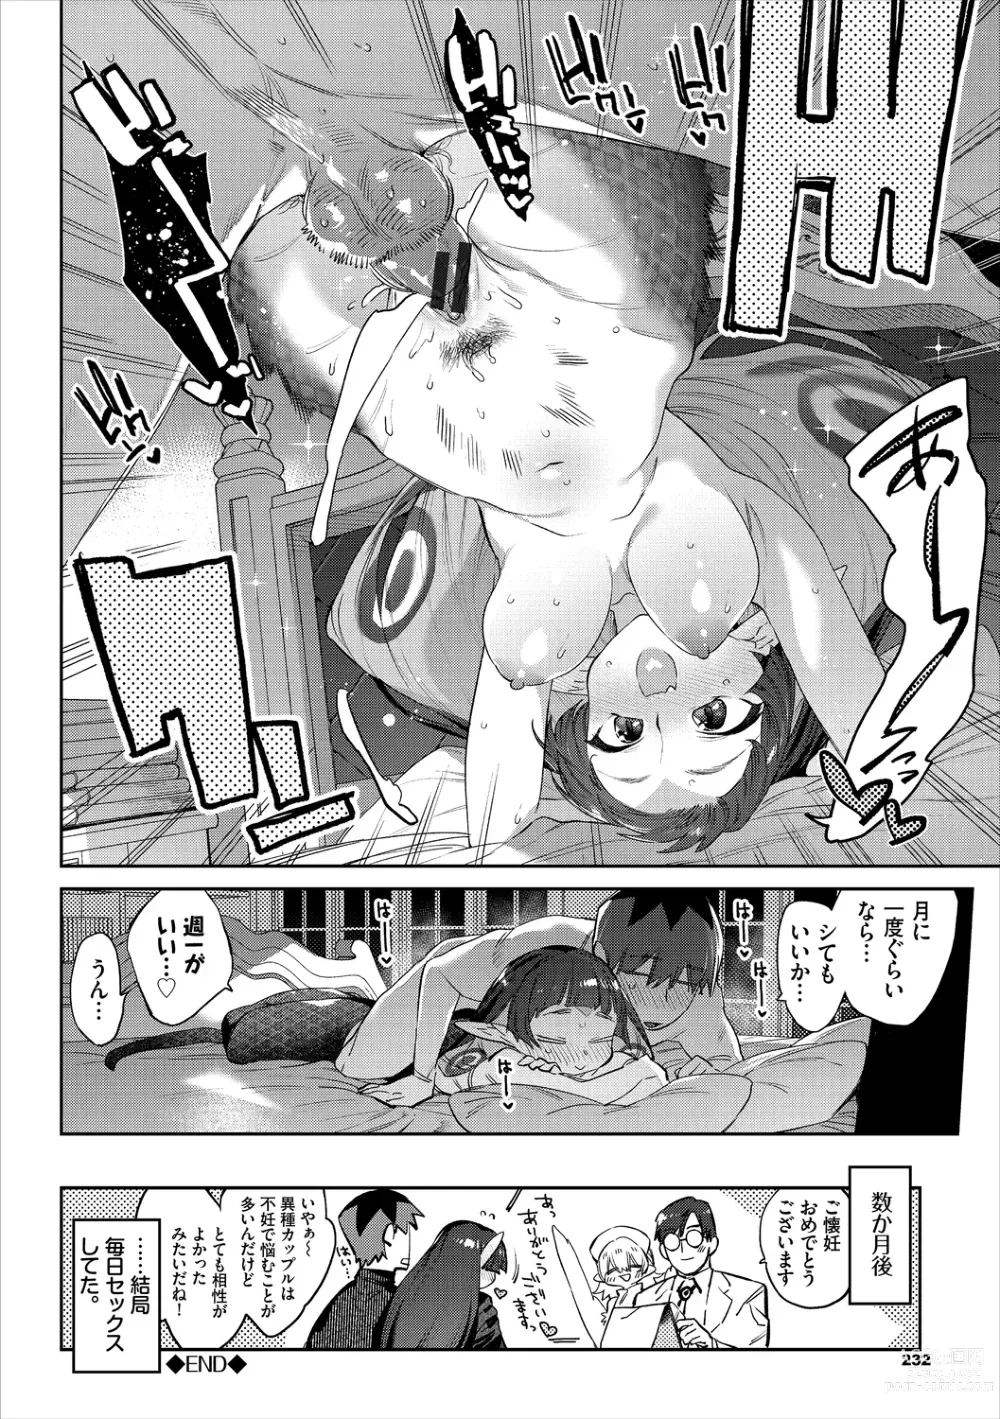 Page 232 of manga Ihou no Otome - Monster Girls in Another World